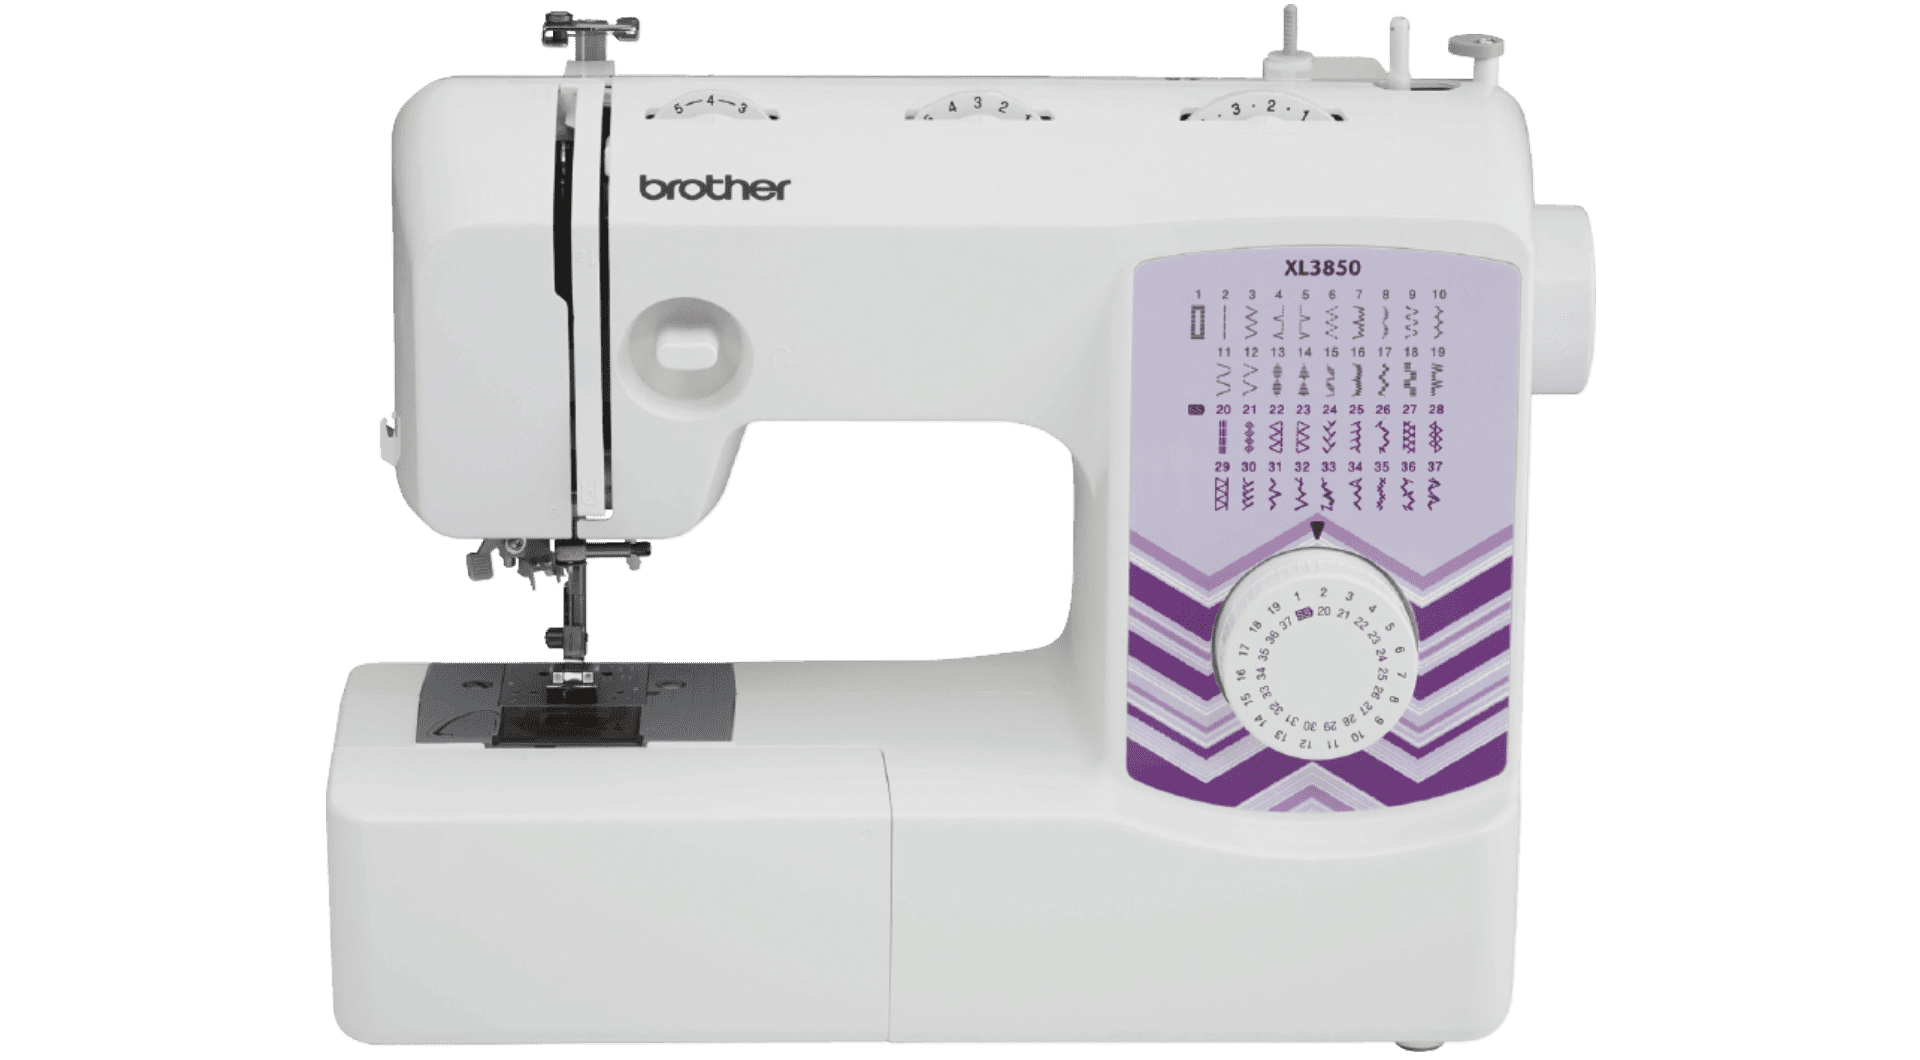 1 of 5 - How to Thread a Bobbin on a Brother XR3774 sewing machine 